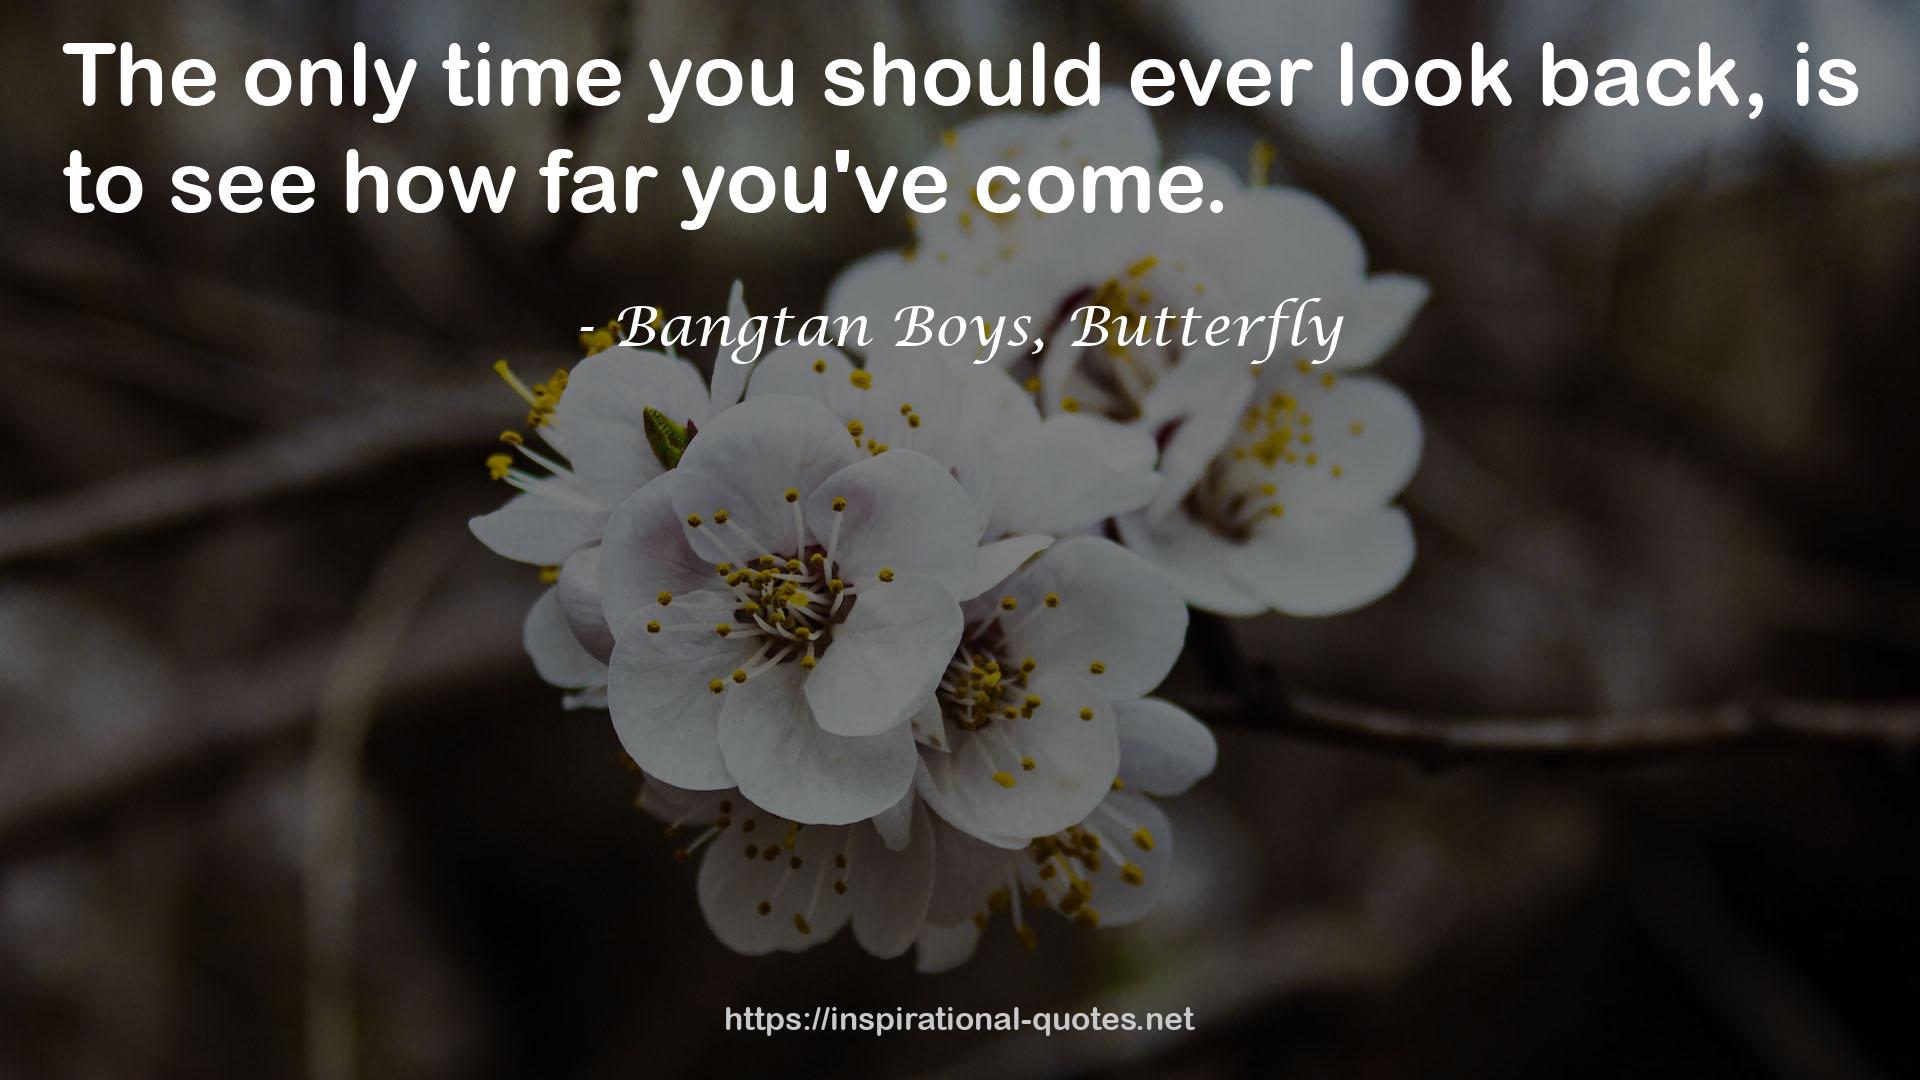 Bangtan Boys, Butterfly QUOTES